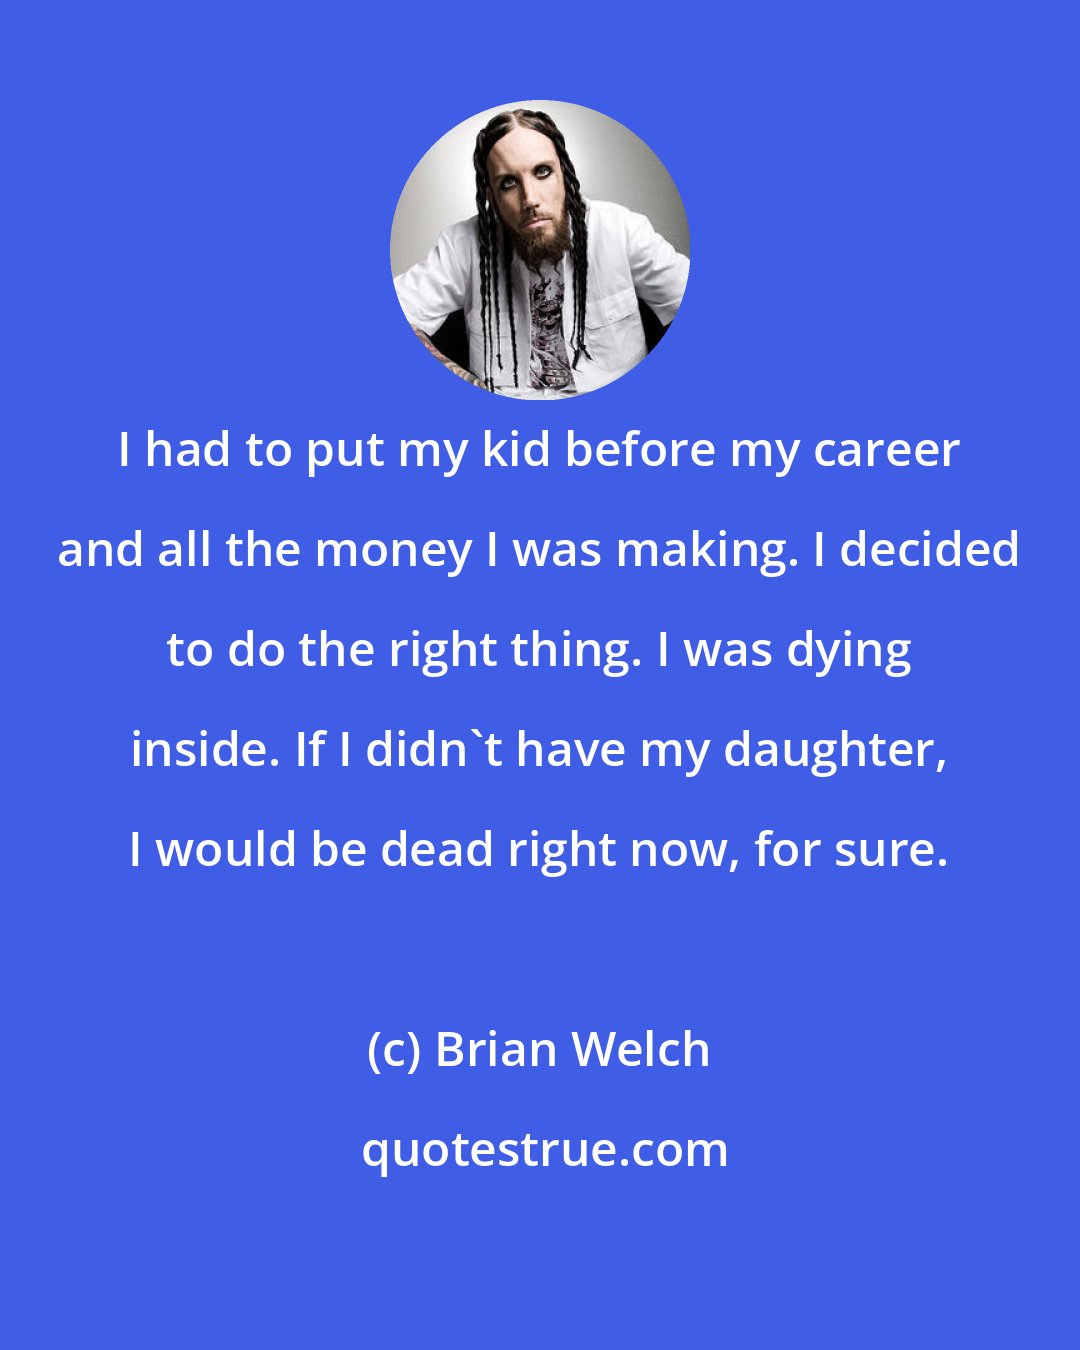 Brian Welch: I had to put my kid before my career and all the money I was making. I decided to do the right thing. I was dying inside. If I didn't have my daughter, I would be dead right now, for sure.